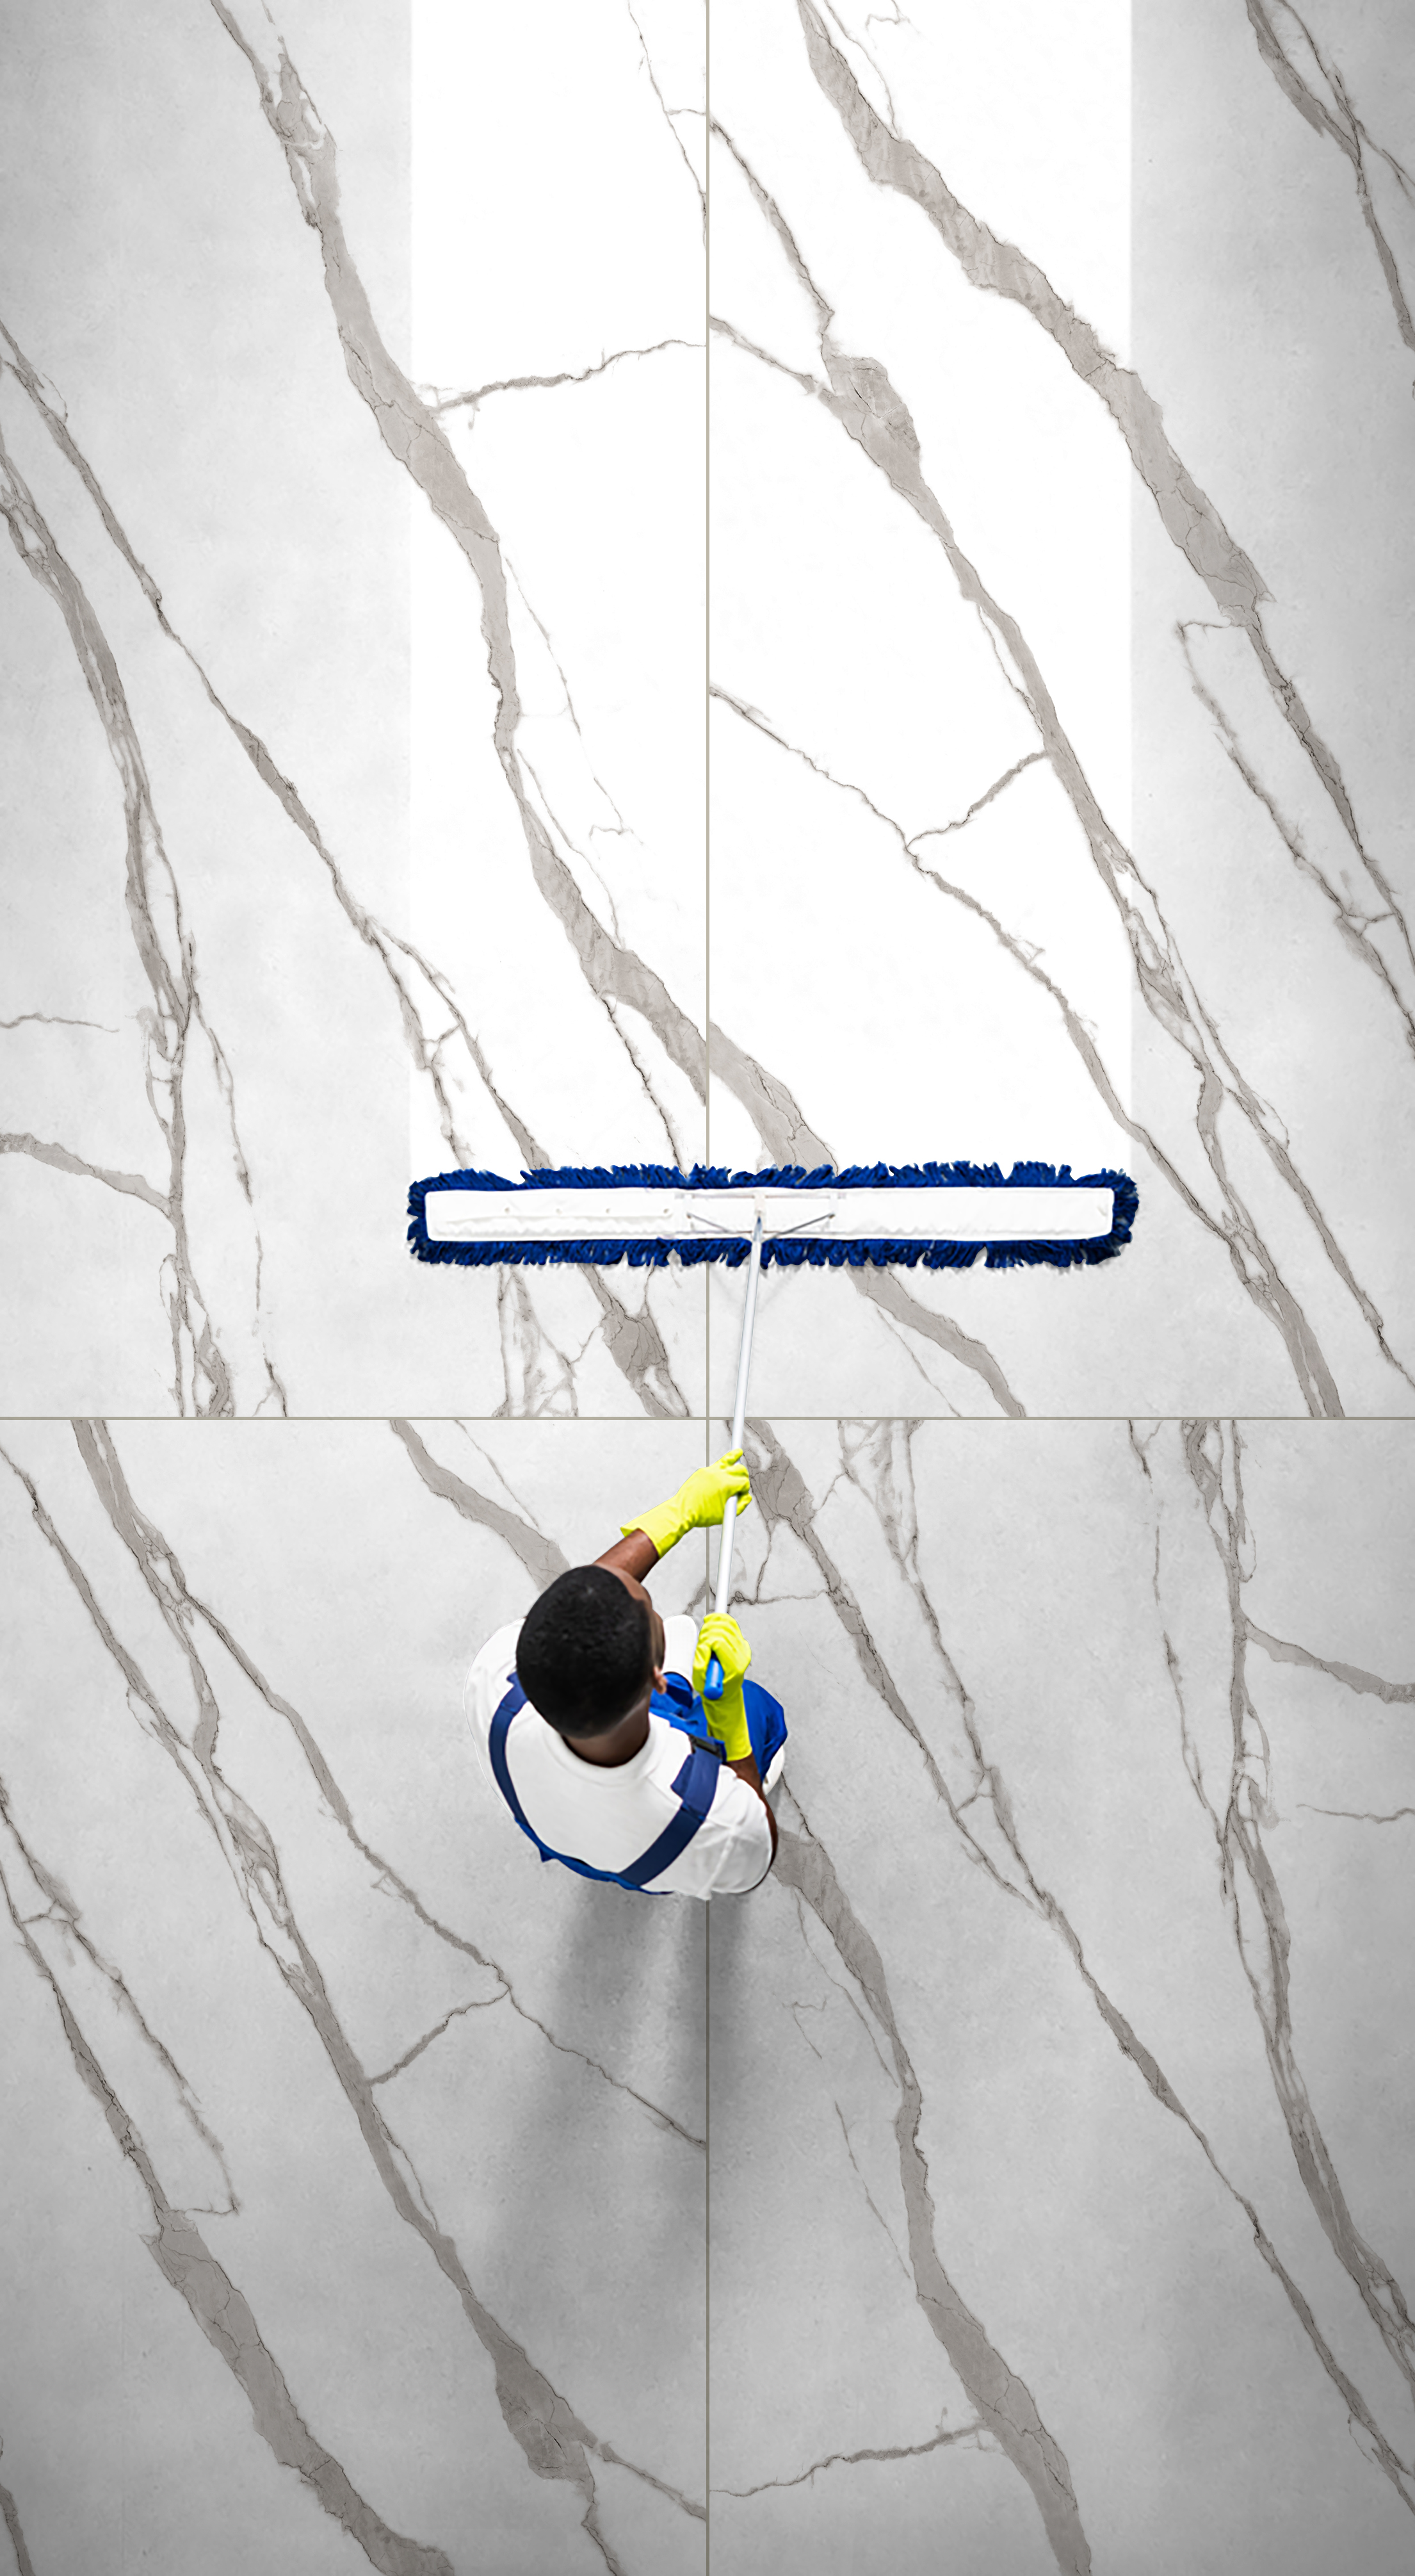 How to clean porcelain tiles